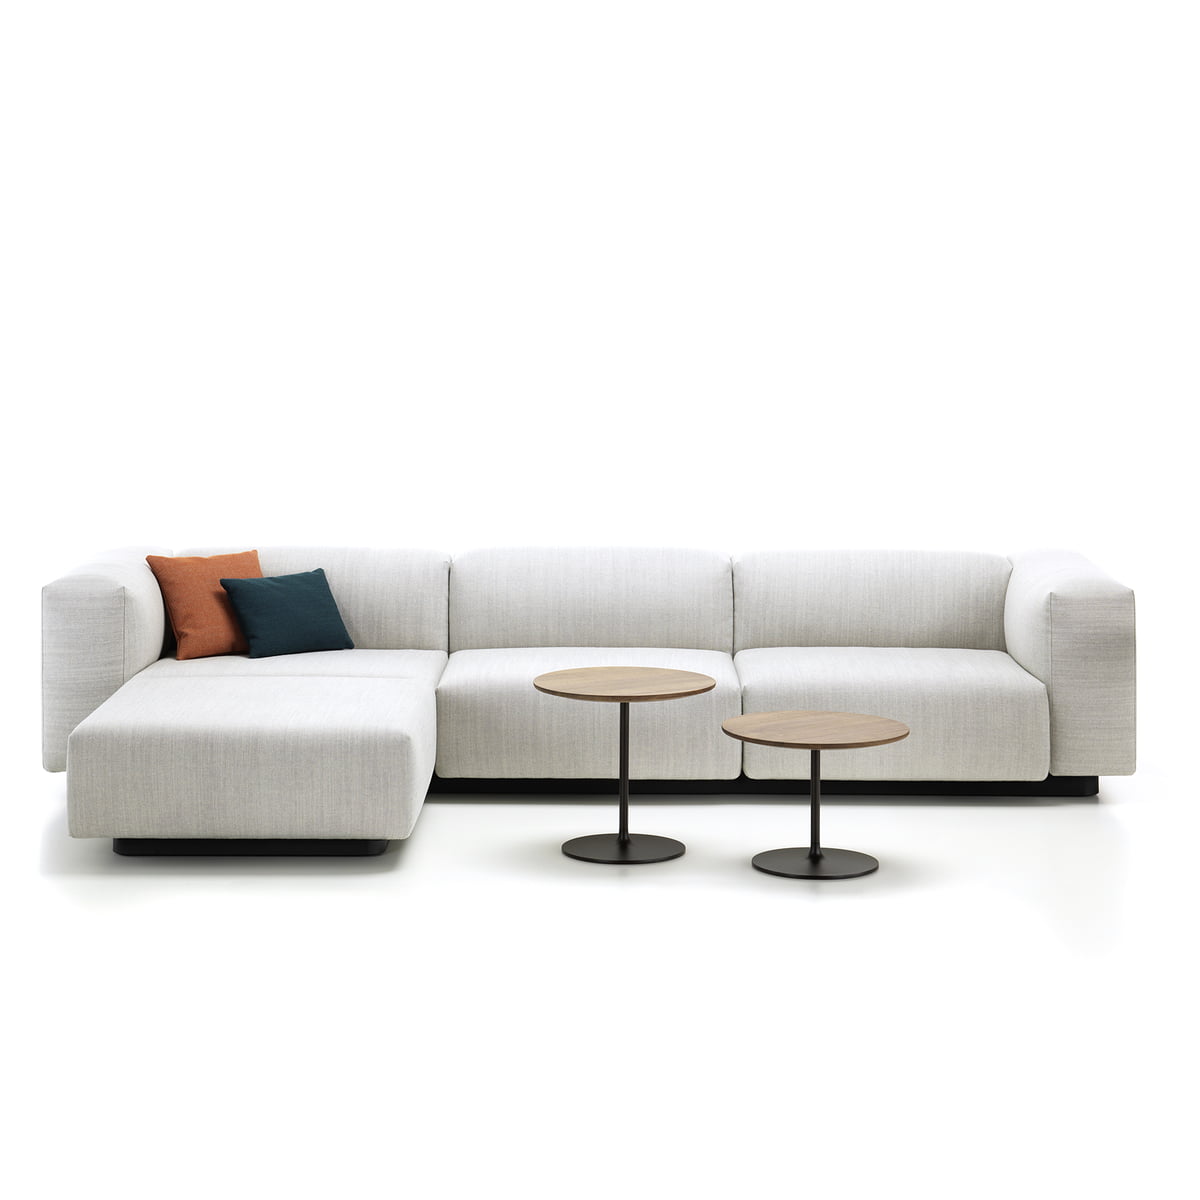 modular sofa soft modular 3-seater with chaise longue and occasional low table KVAIHKR